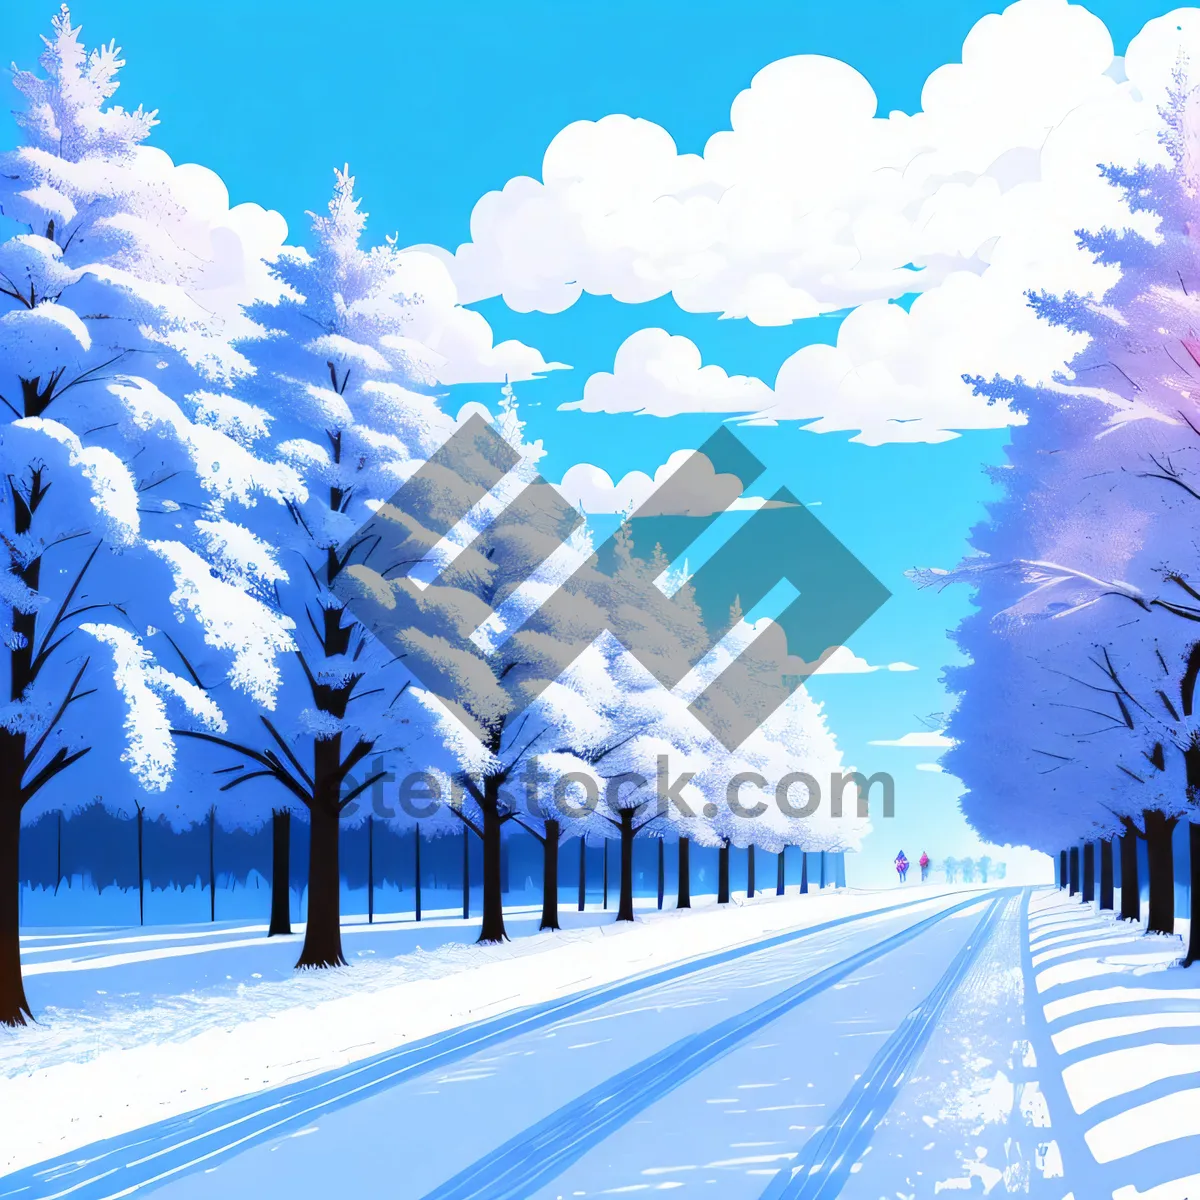 Picture of Snowy Crystal Tree: A Captivating Winter Art Wallpaper